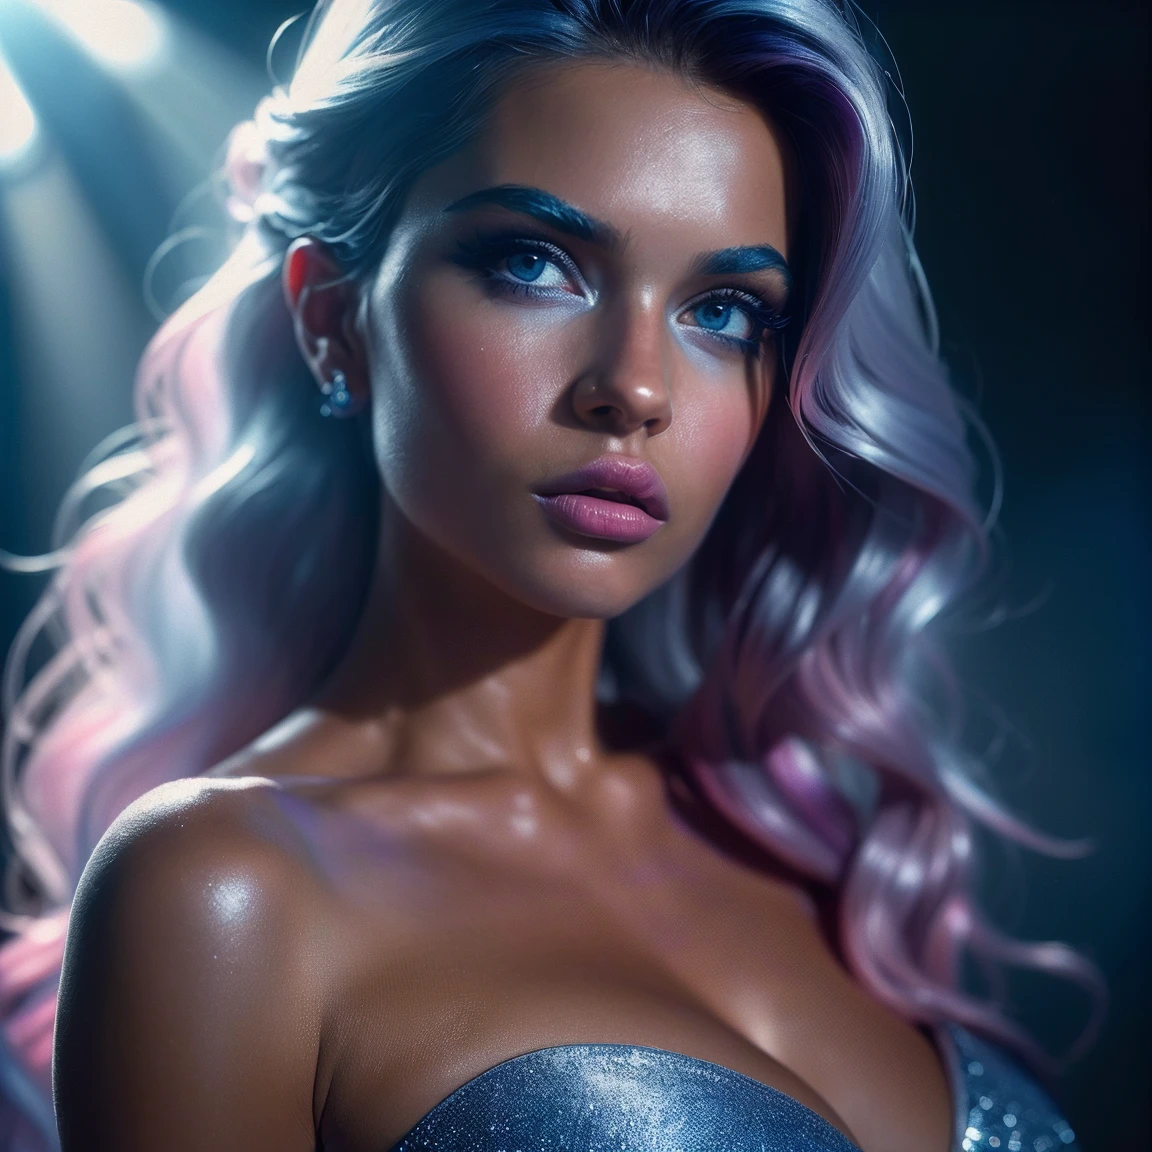 (((ultra realistic))) Photo, masterpiece, top quality, (tanned skin), (Ultra detailed face and eyes:1.3), 1 girl, Adult, in a dress, ((Caramel eyes)), ((Eye makeup, pink mascara)), ((large detailed lips)), ((Blue wavy hair)), ((Stylish hairstyle)) , (Natural breasts). ((Posing)), photoshoot, (Soft) Lighting, (The play of light and shadows), depth of field, bokeh, (special attention to skin detail: 1.2), Detailed leather texture, skin pores. (Erotic atmosphere of the frame. Color range - Blue, purple, pink, silver, white tones), UDR, ((Film grain)), ((rays)), (Glare), ((close-up portrait, close to the camera)) , ultra detialed.